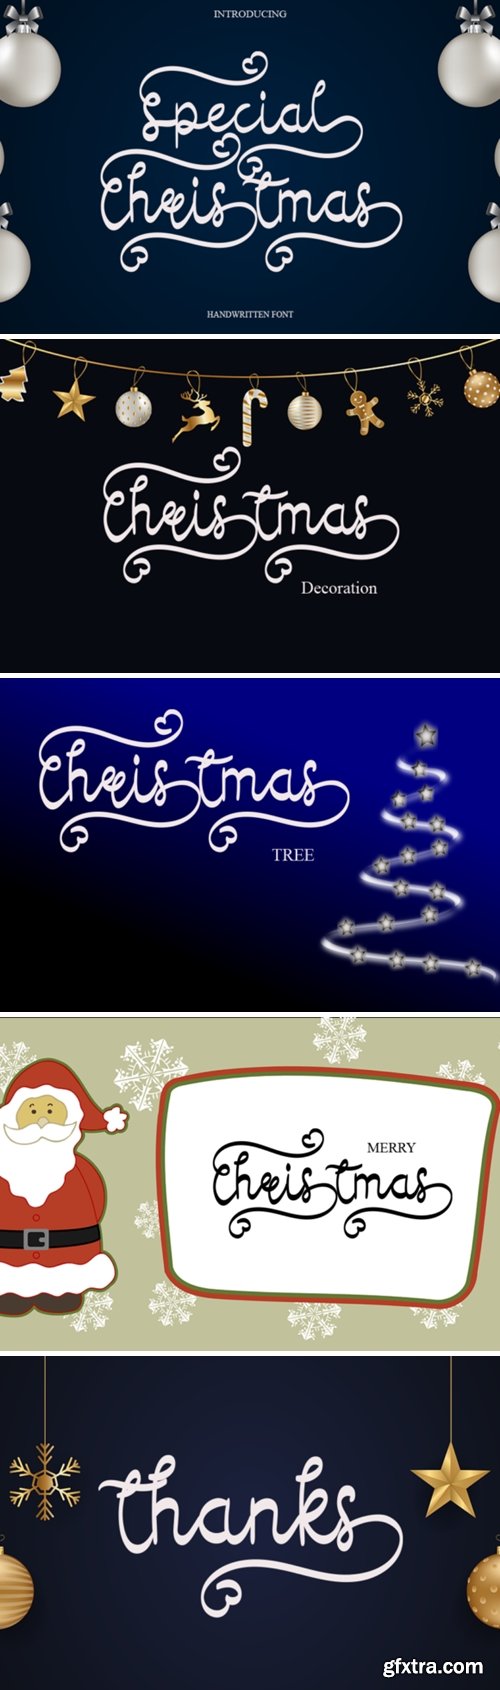 Special Christmas Font